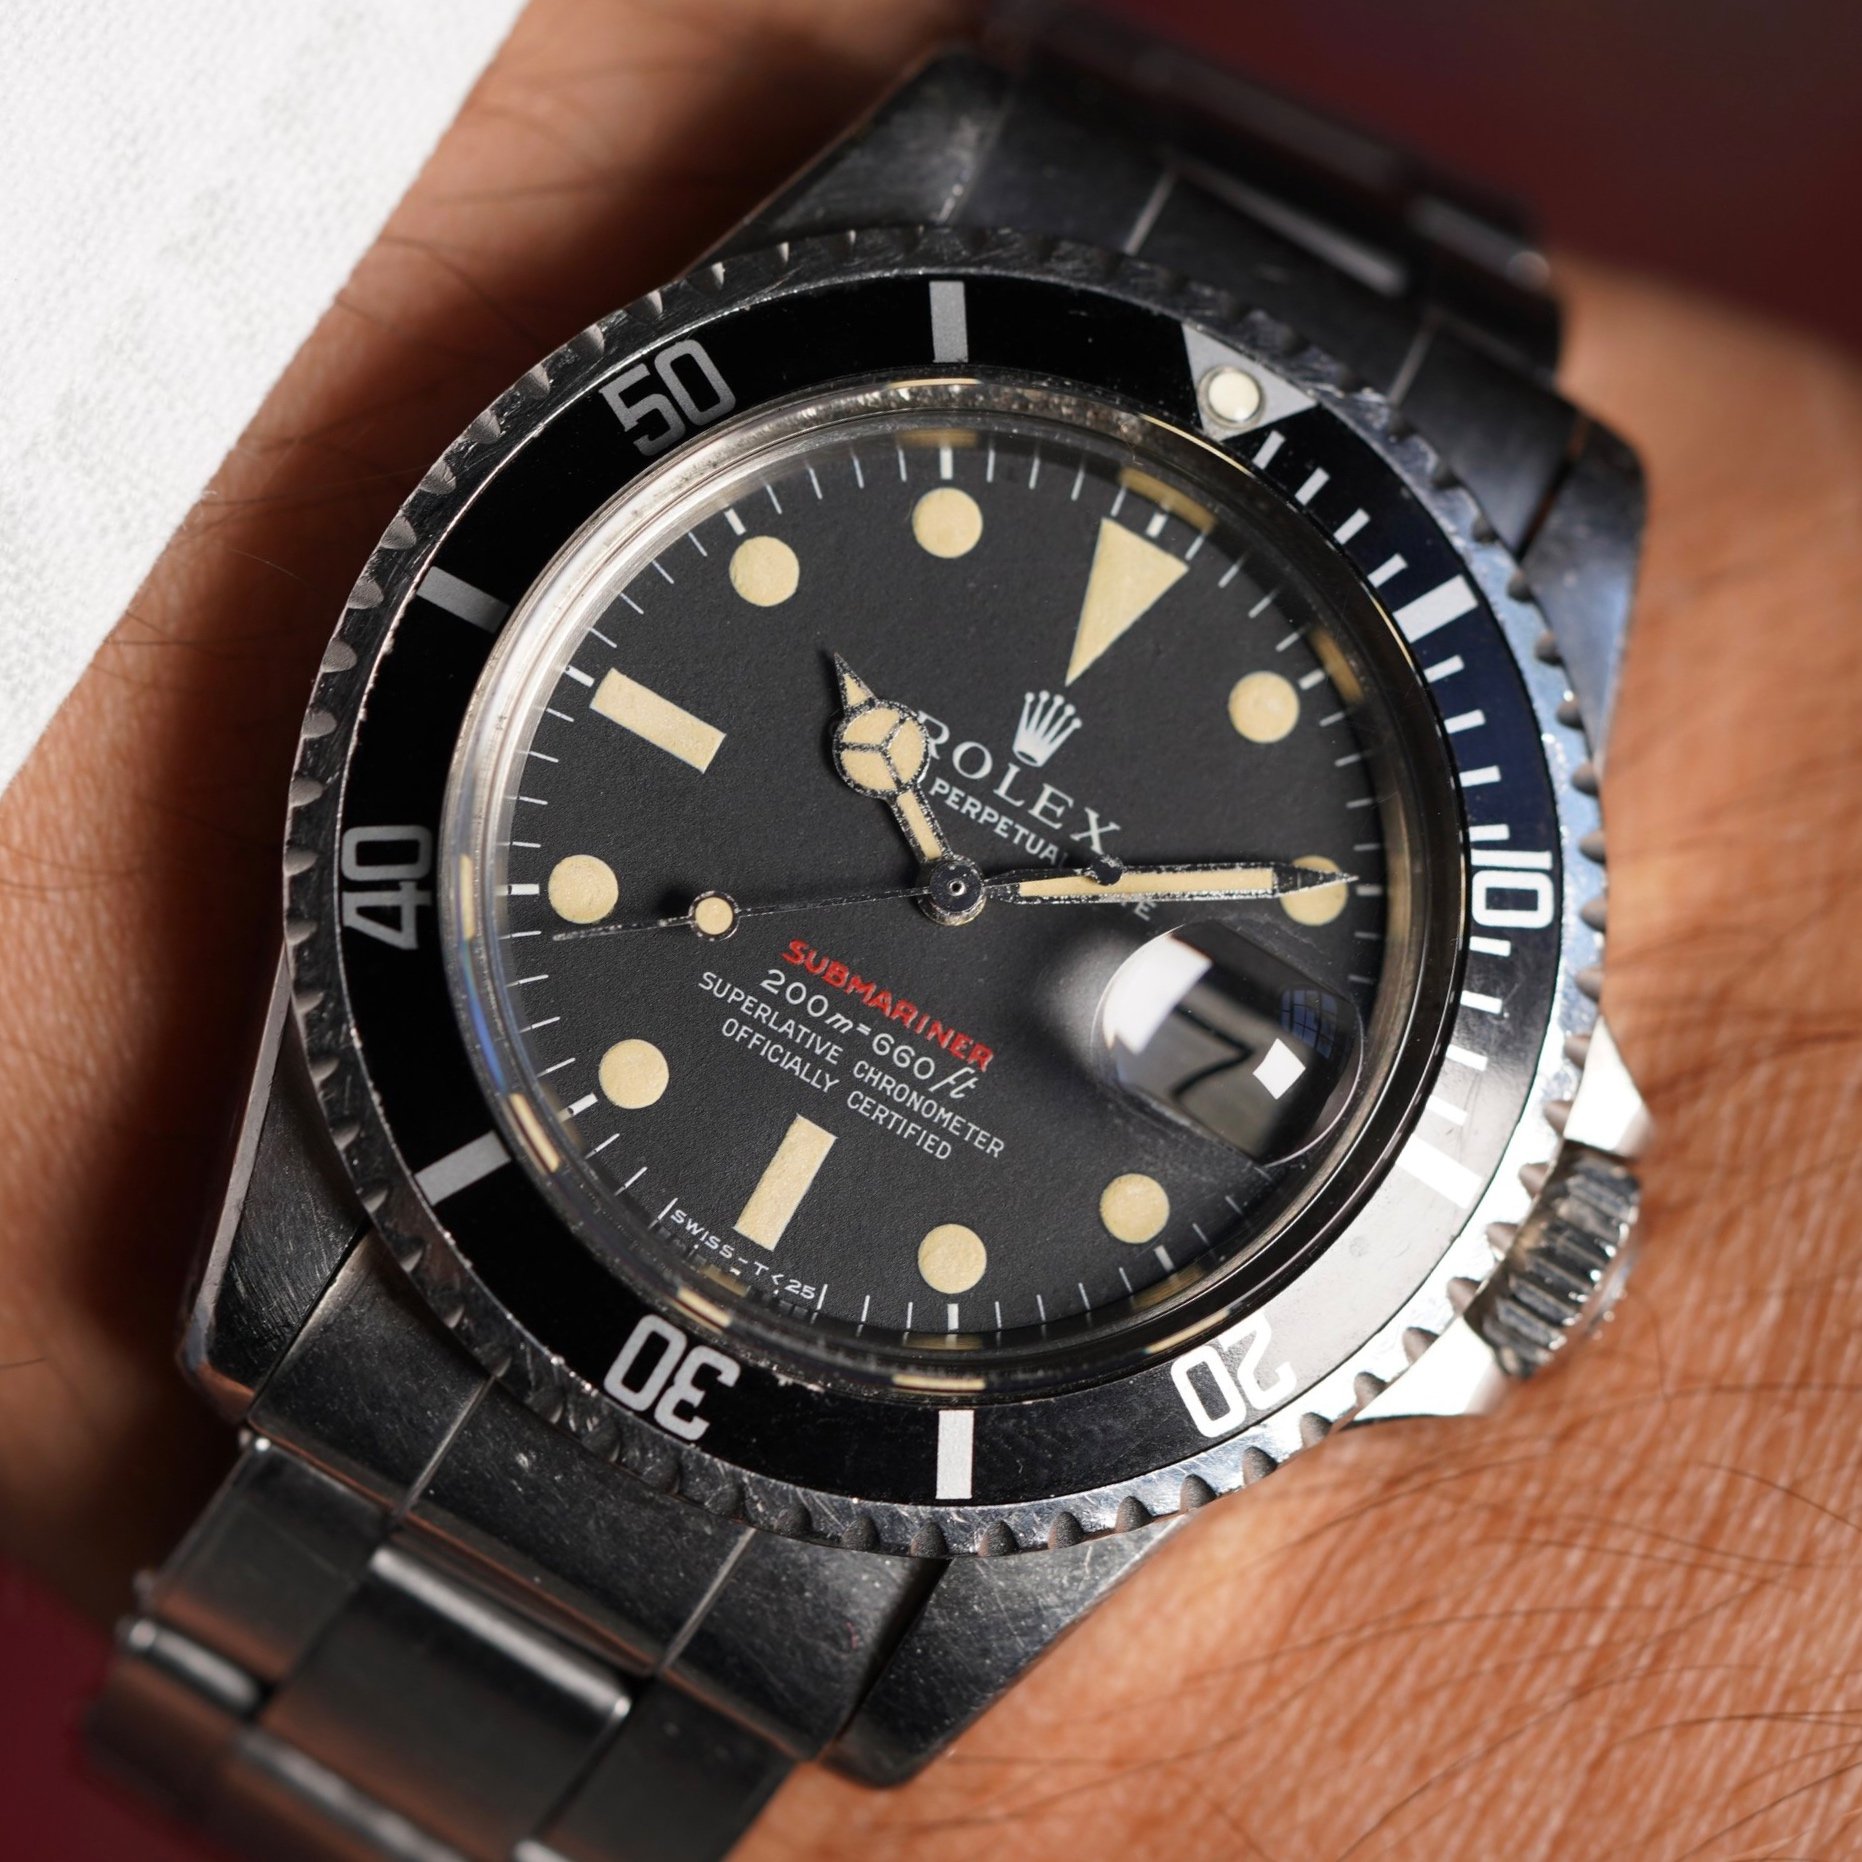 Rolex Red Submariner Reference 1680 w/ Meters First Dial Unpolished